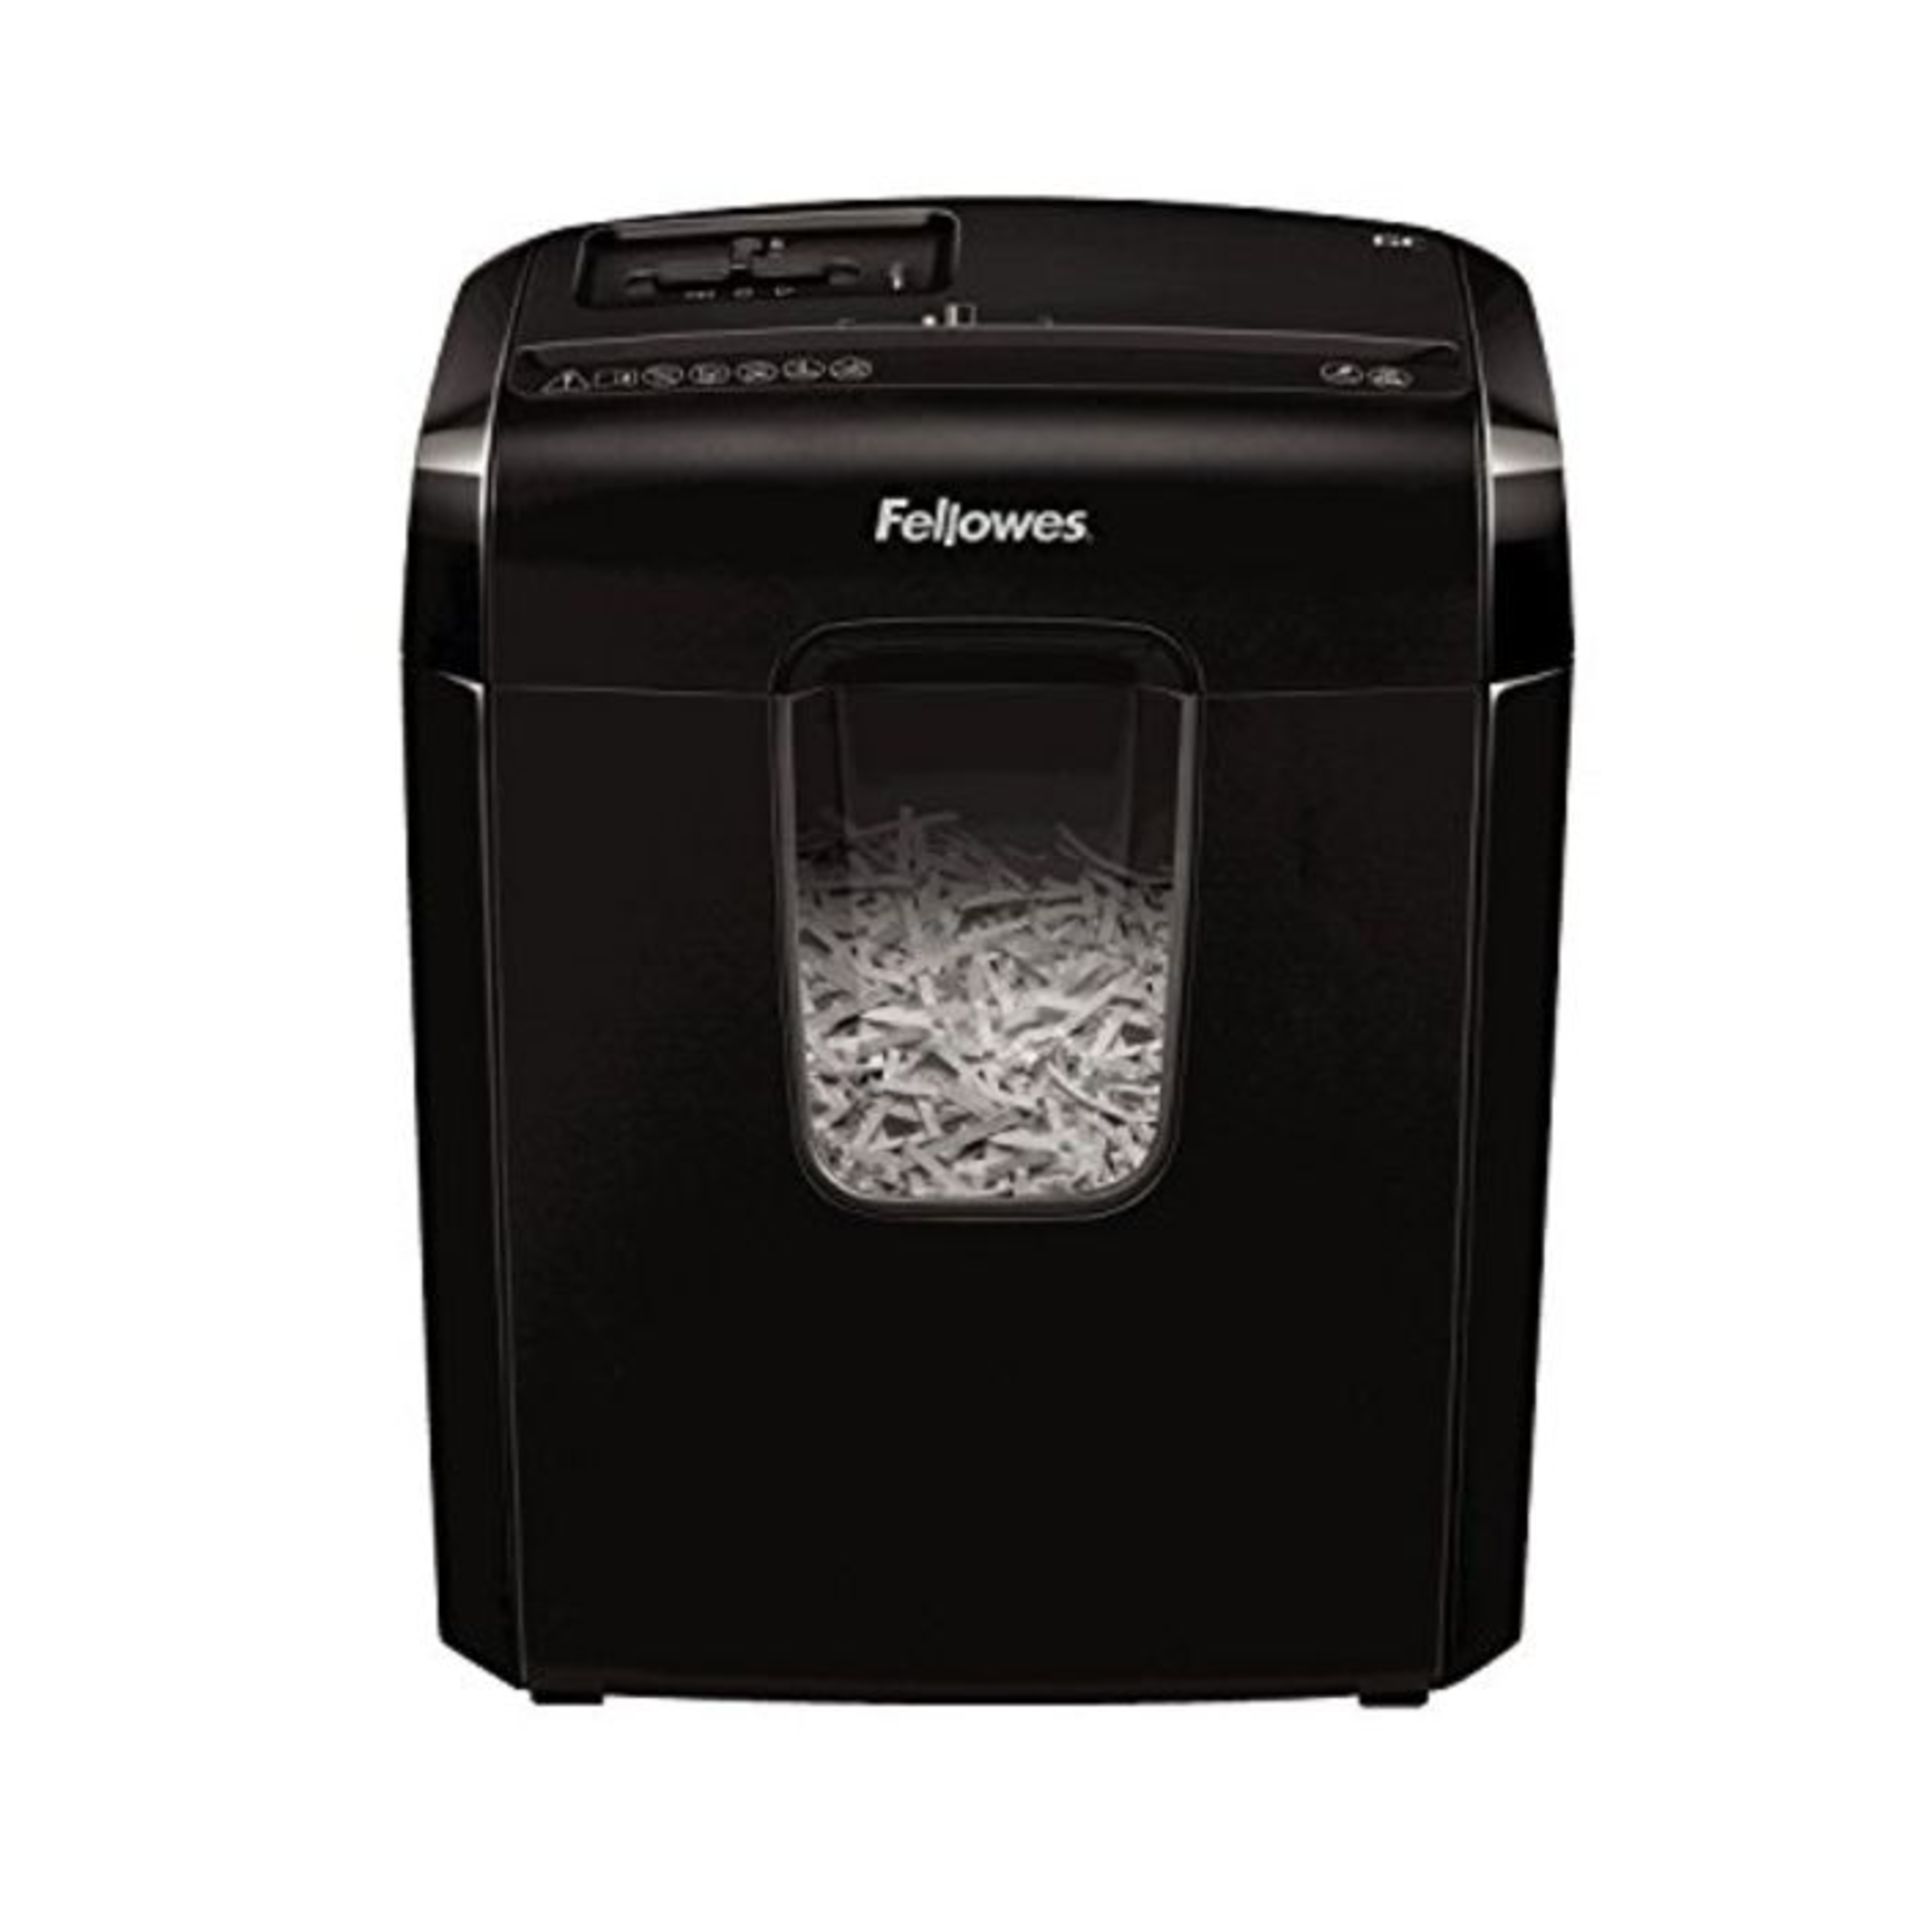 Fellowes Powershred 6C Personal 6 Sheet Cross Cut Paper Shredder for Home Use with Saf